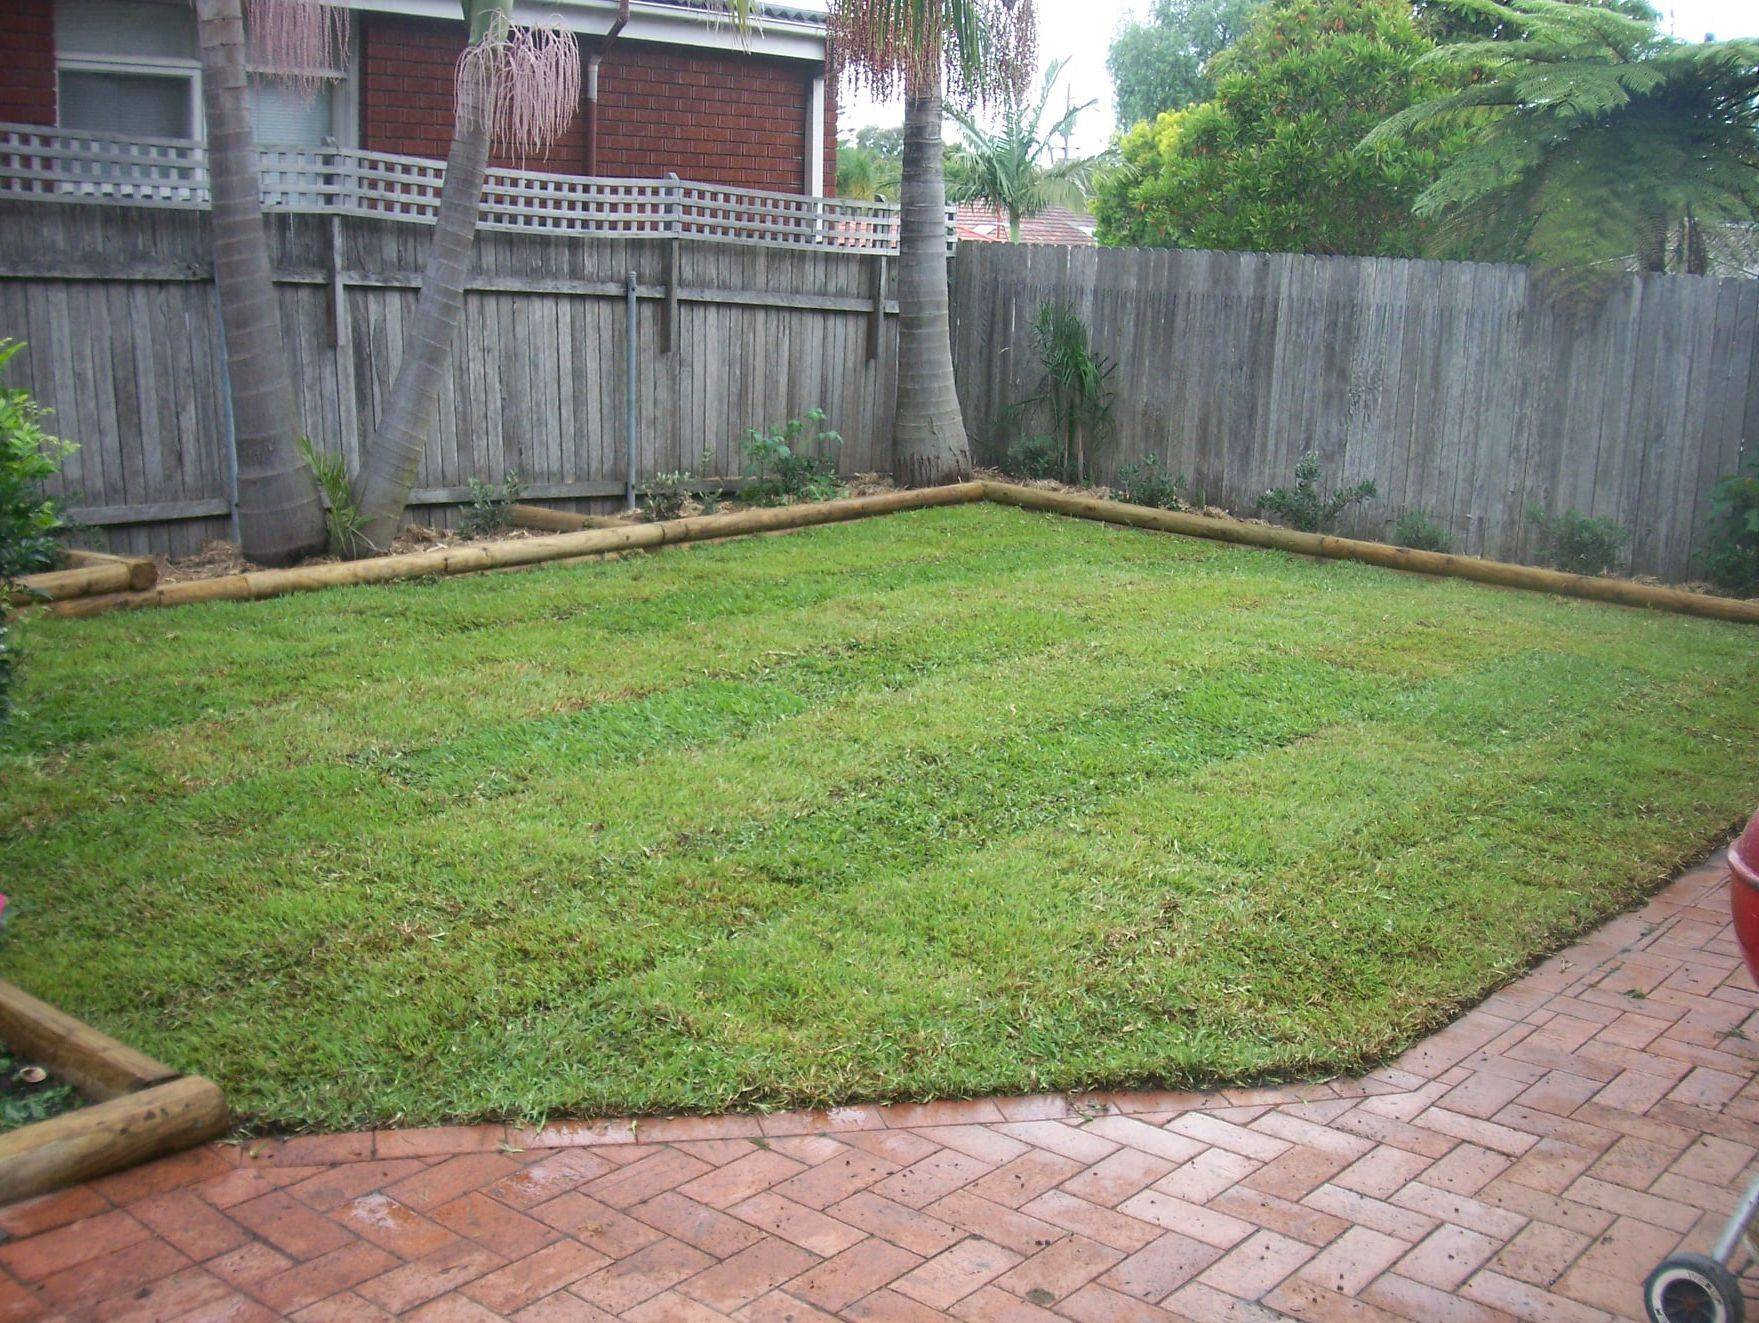 Treated Pine Slabs used as Garden Edging with new turf laid. Garden Renovation, Garden Makeover, Garden Clean up, Backyard tidy up Wollongong NSW